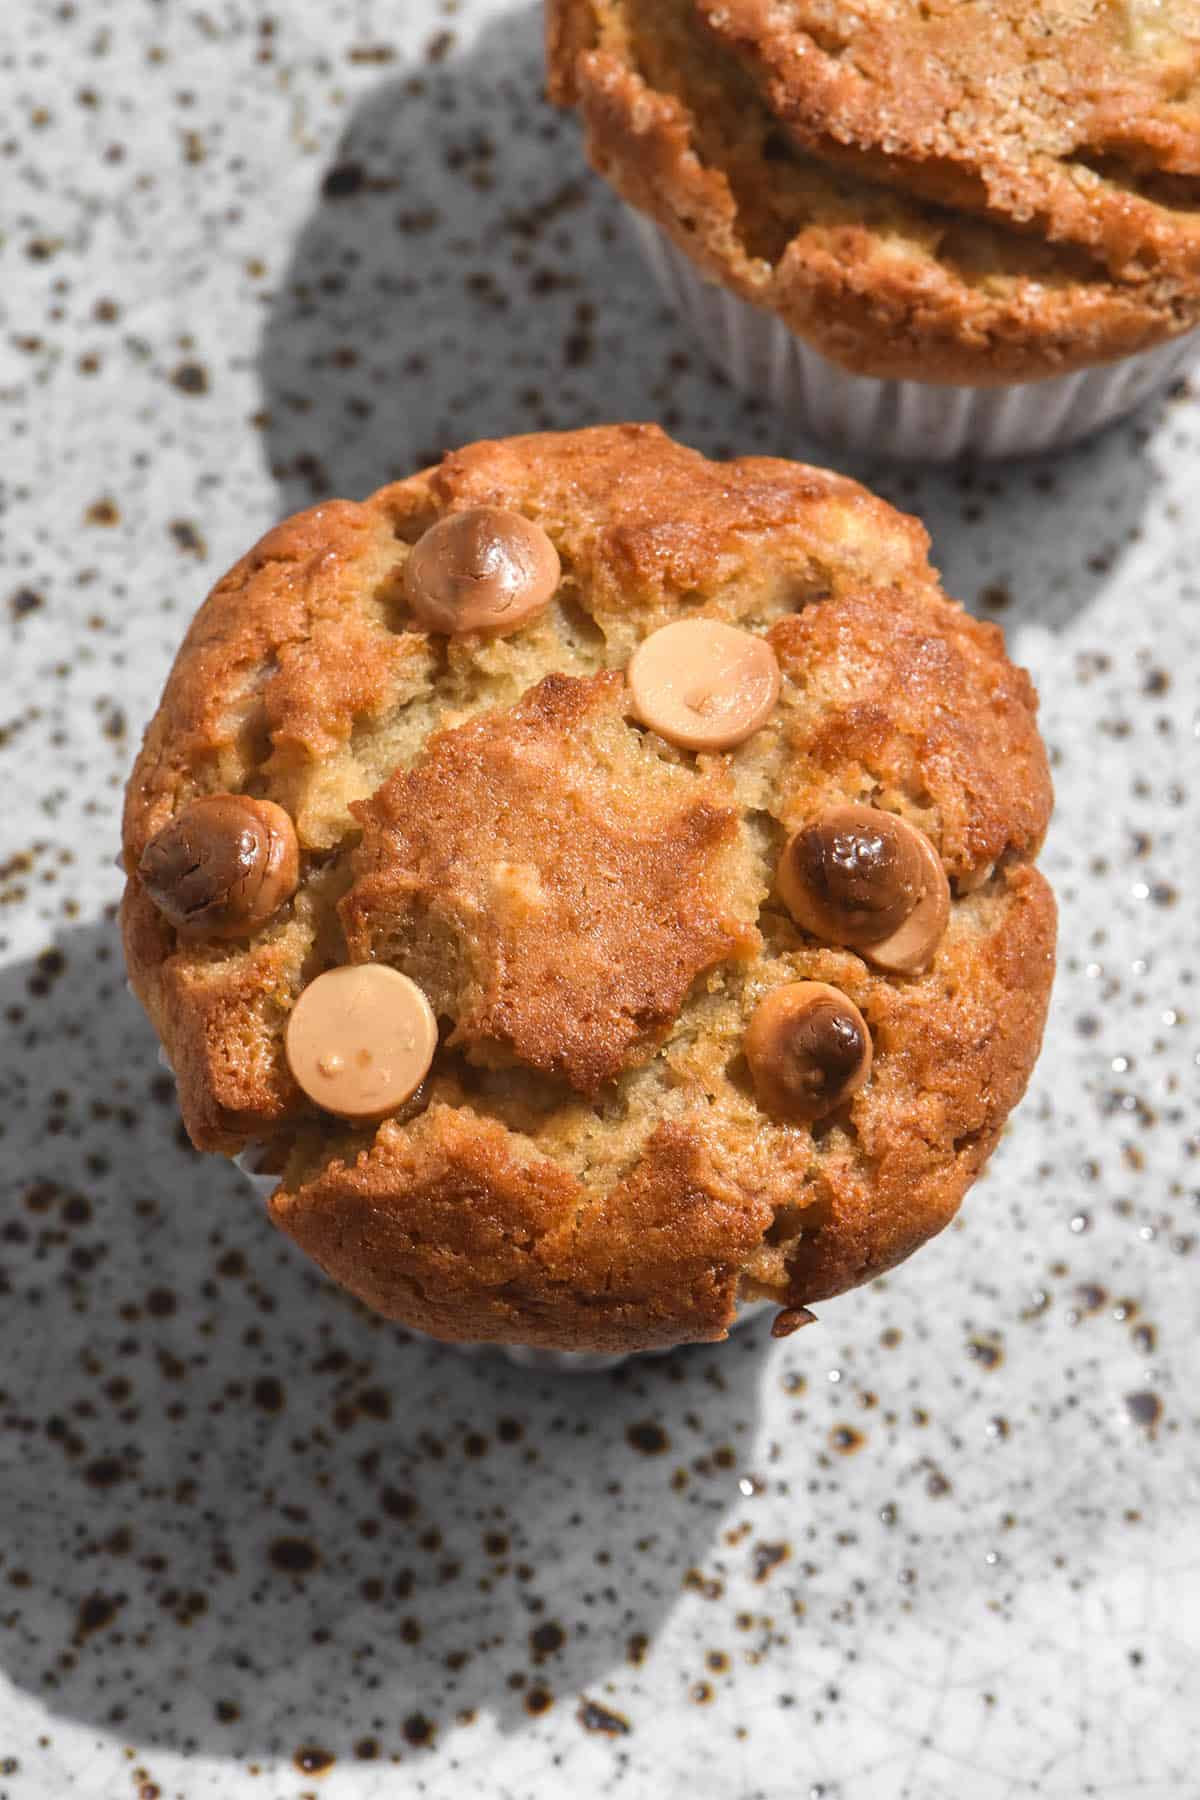 A close up macro image of two gluten free banana choc chip muffins on a white ceramic speckled plate. The muffins are golden brown and topped with either choc chips or finishing sugar. 